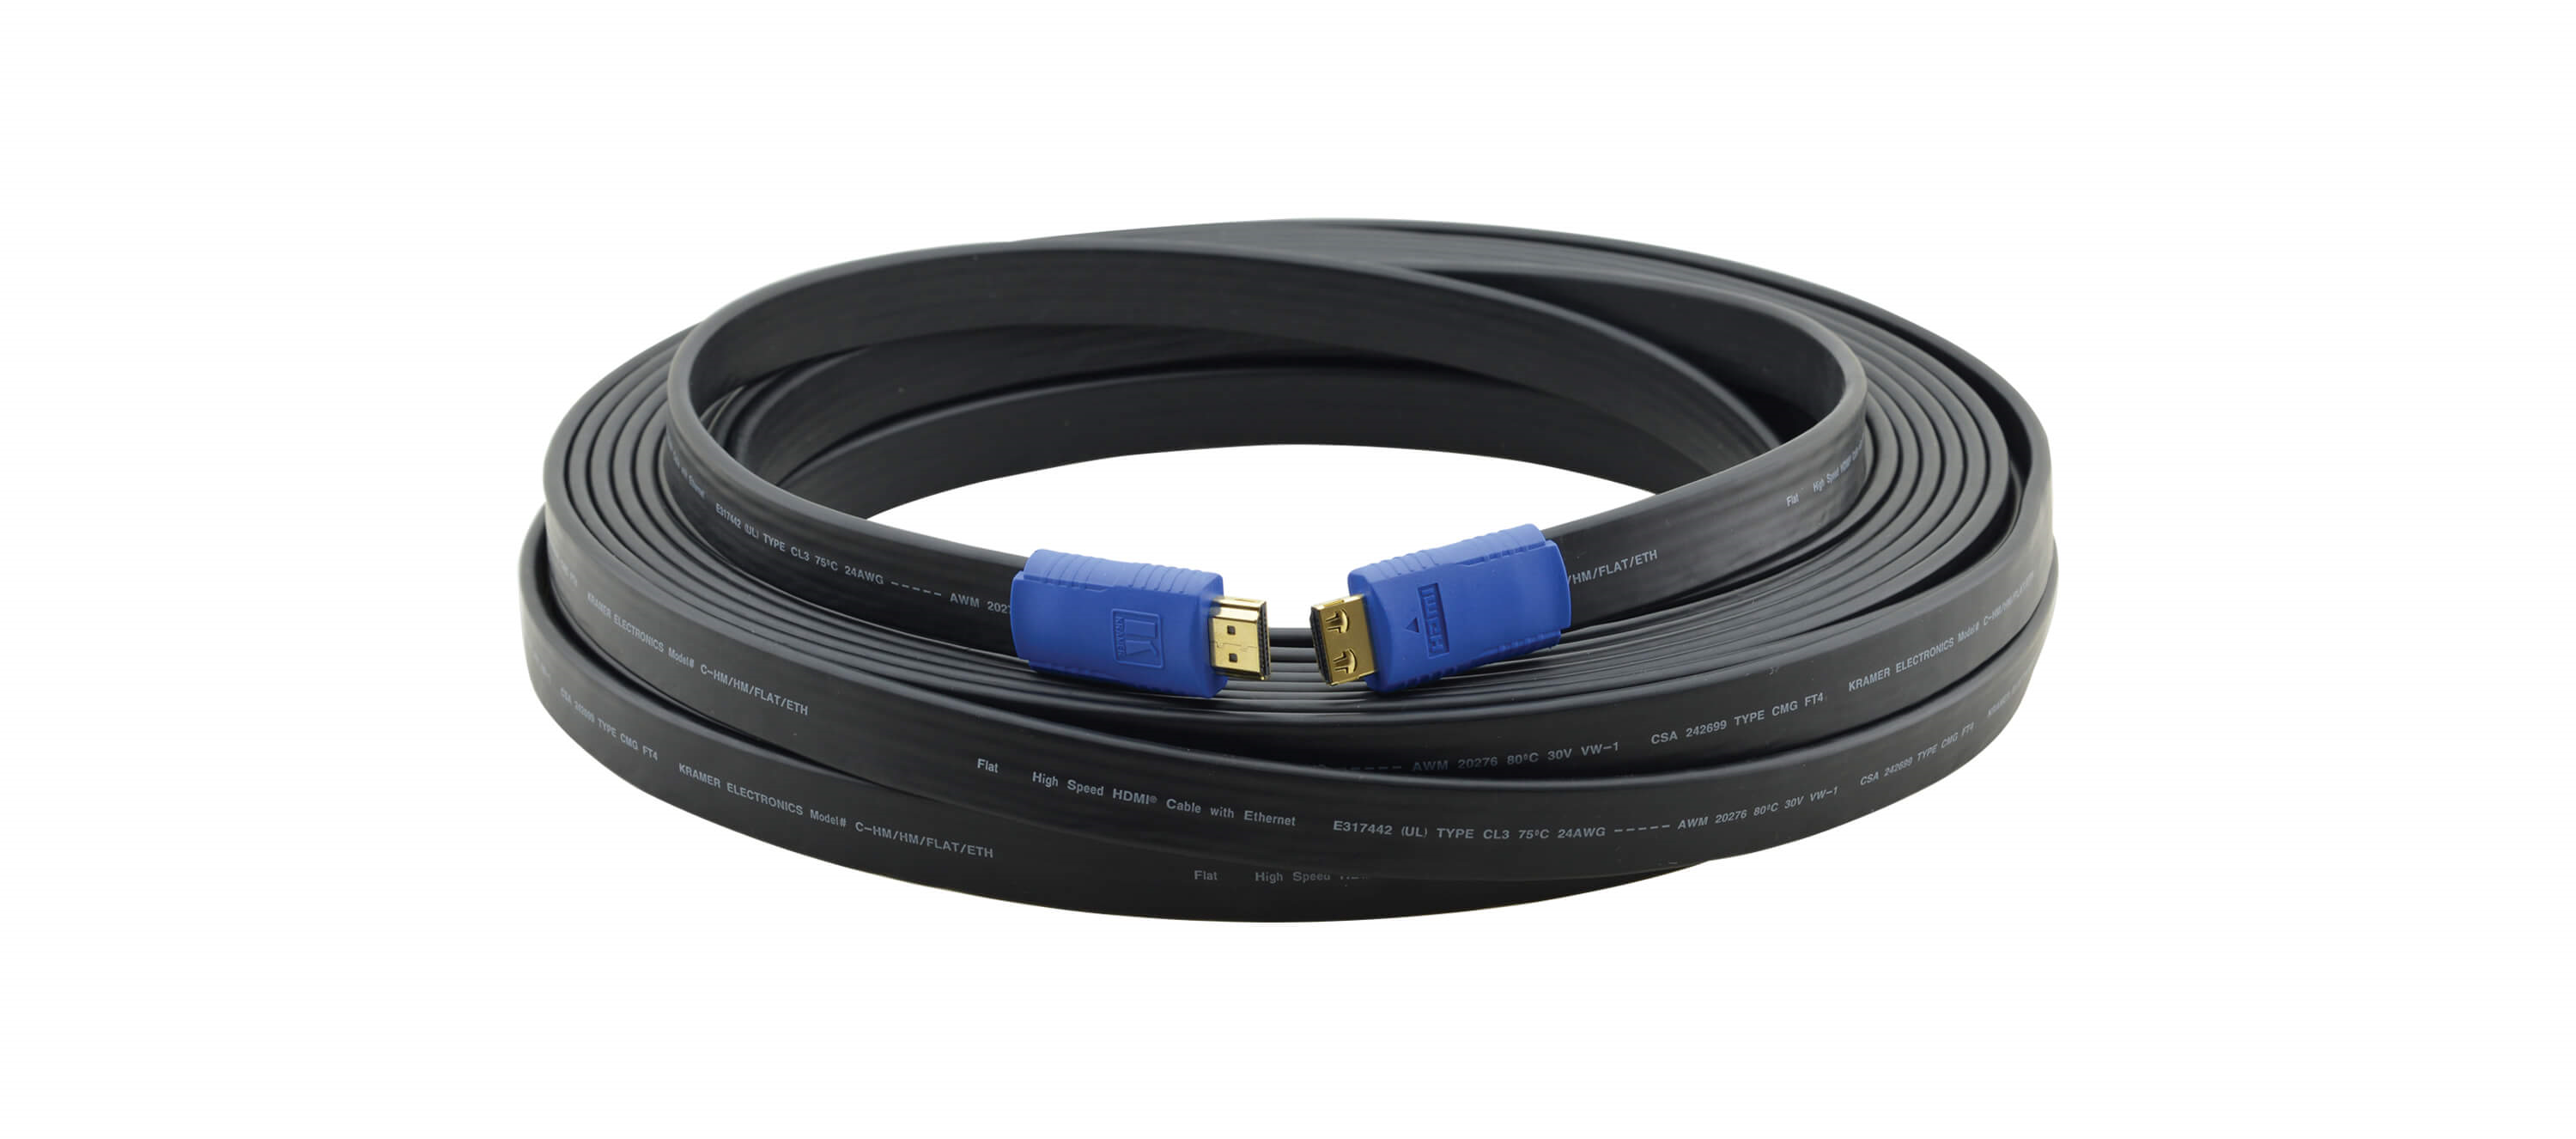 C-HM/HM/FLAT/ETH-15 Flat High–Speed HDMI Cable with Ethernet - 15'